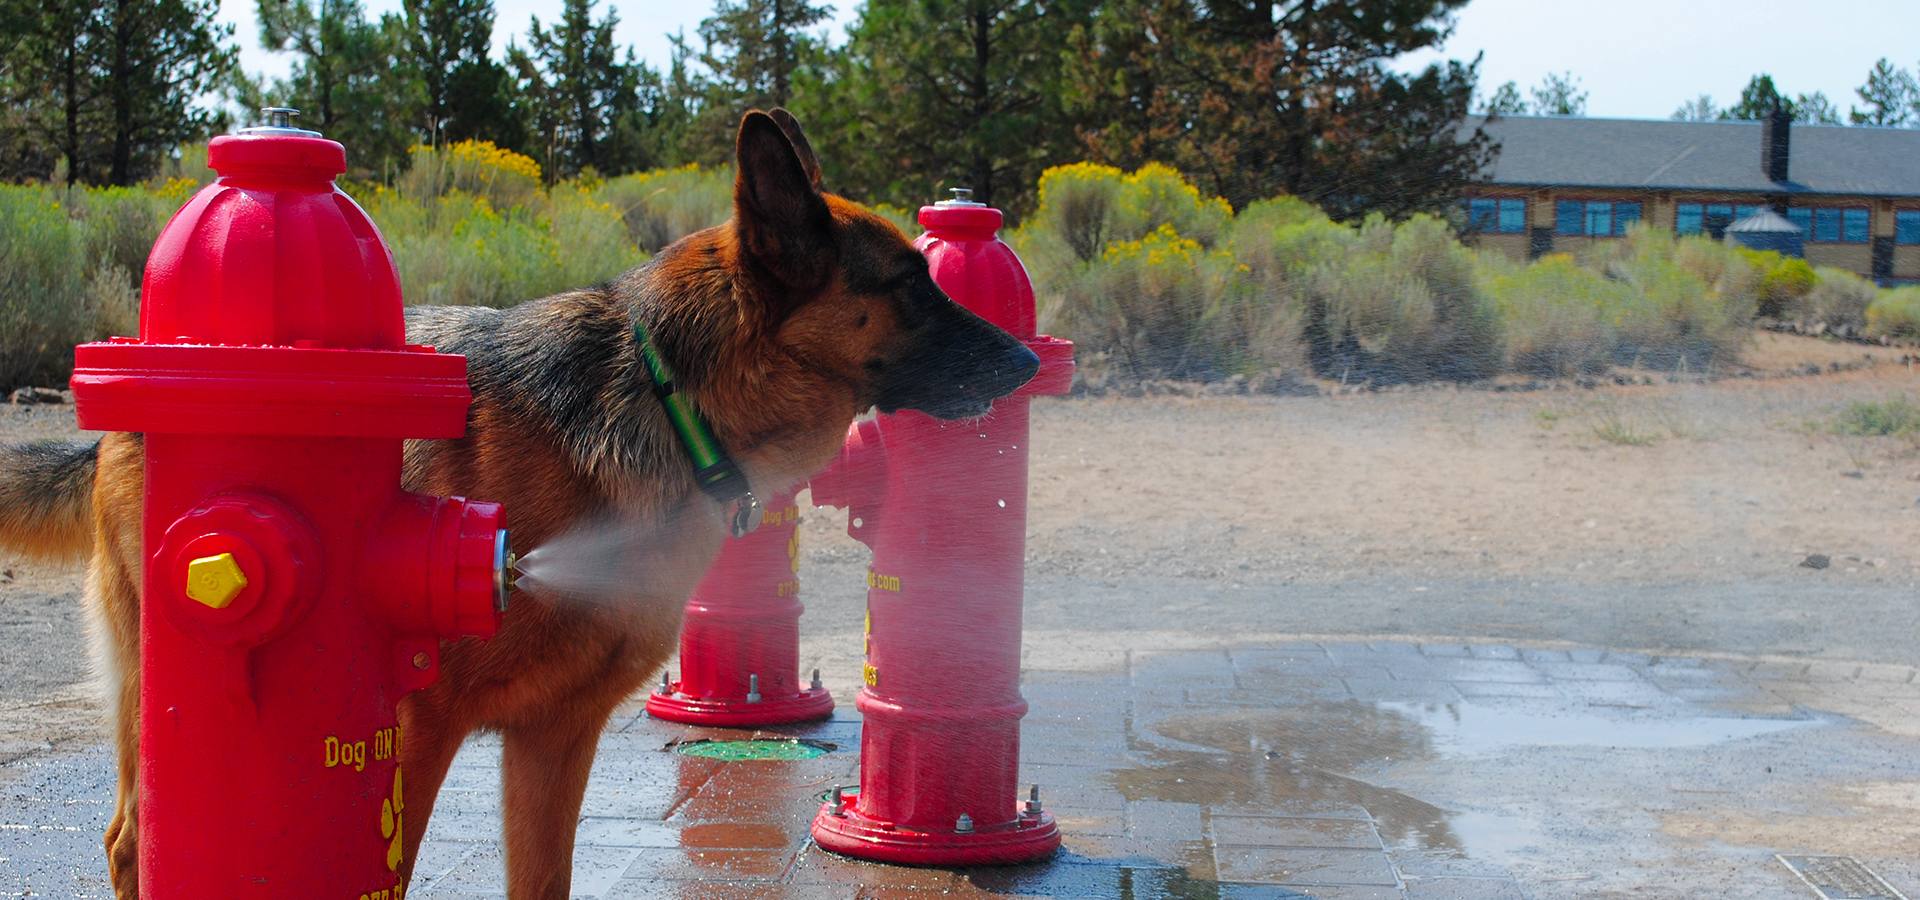 A dog cooling itself off at Pine Nursery Park.